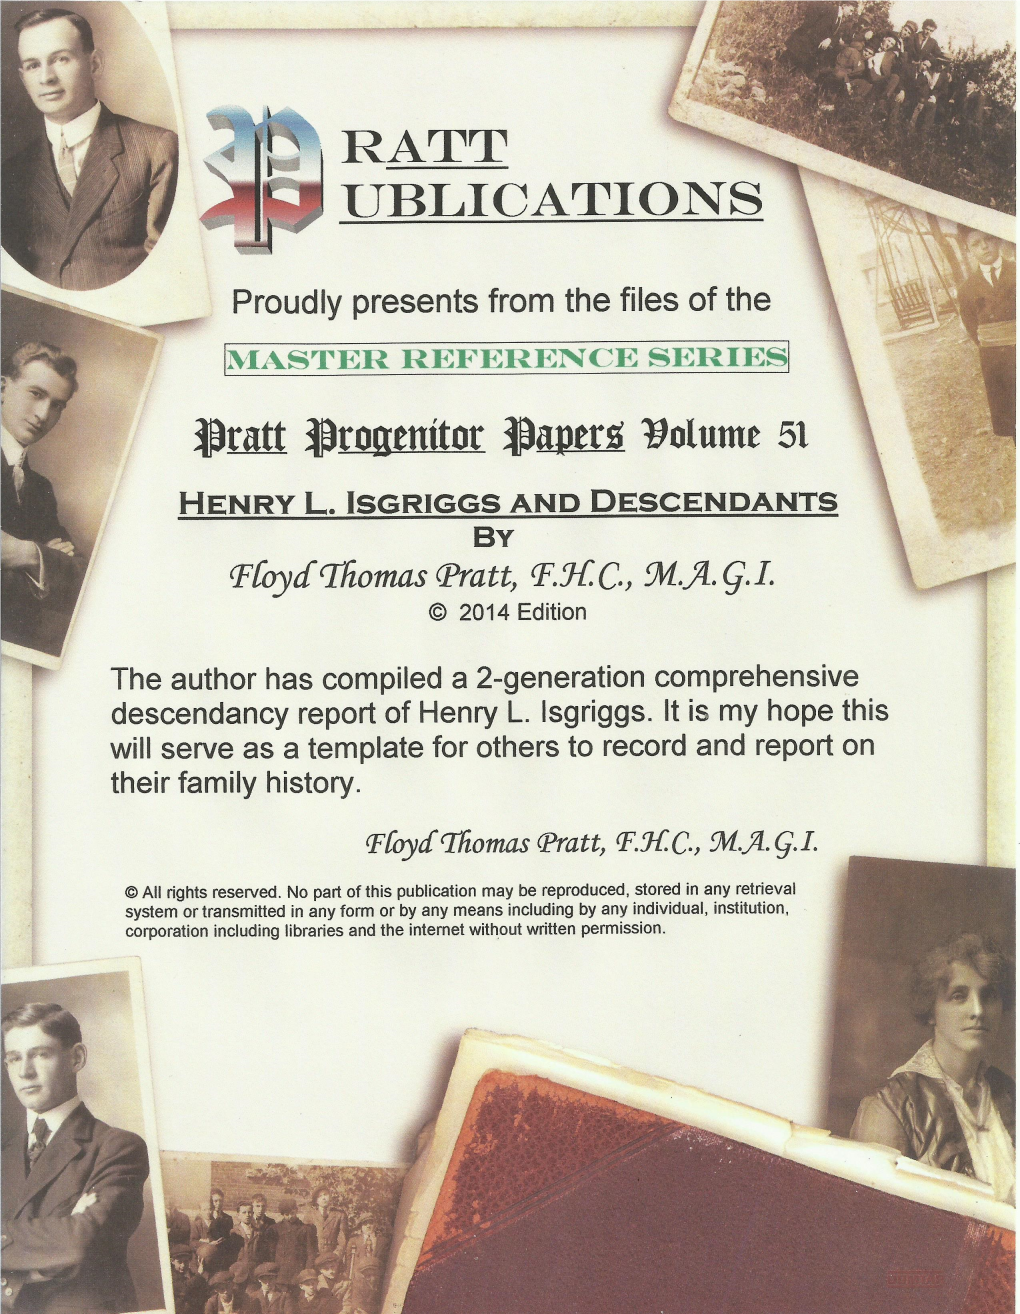 Henry L. Isgriggs and Descendants Containing 2 Generations © 2014 by Floyd Thomas Pratt F.H.C., M.A.G.I